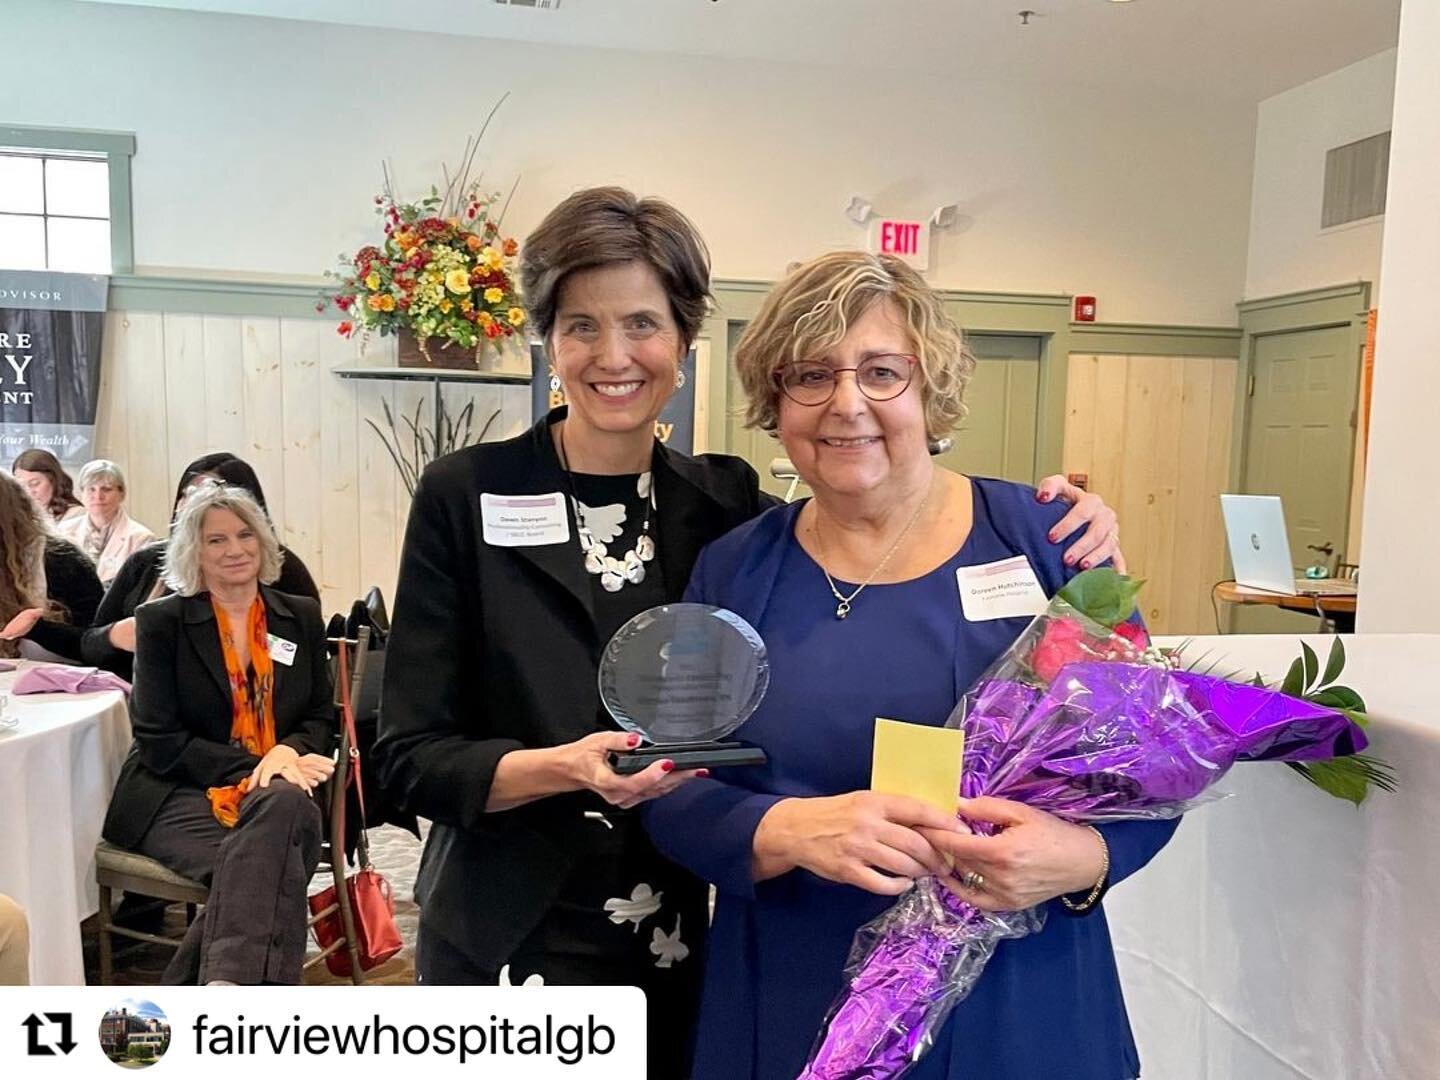 💫 It&rsquo;s #internationalwomensday 💪 I was so honored to present this Mentor Leader award to Doreen Hutchinson, Fairview Hospital&rsquo;s Vice President of Operations/Chief Nurse, at the @sberkchamber Women in Leadership event today! Doreen is a 